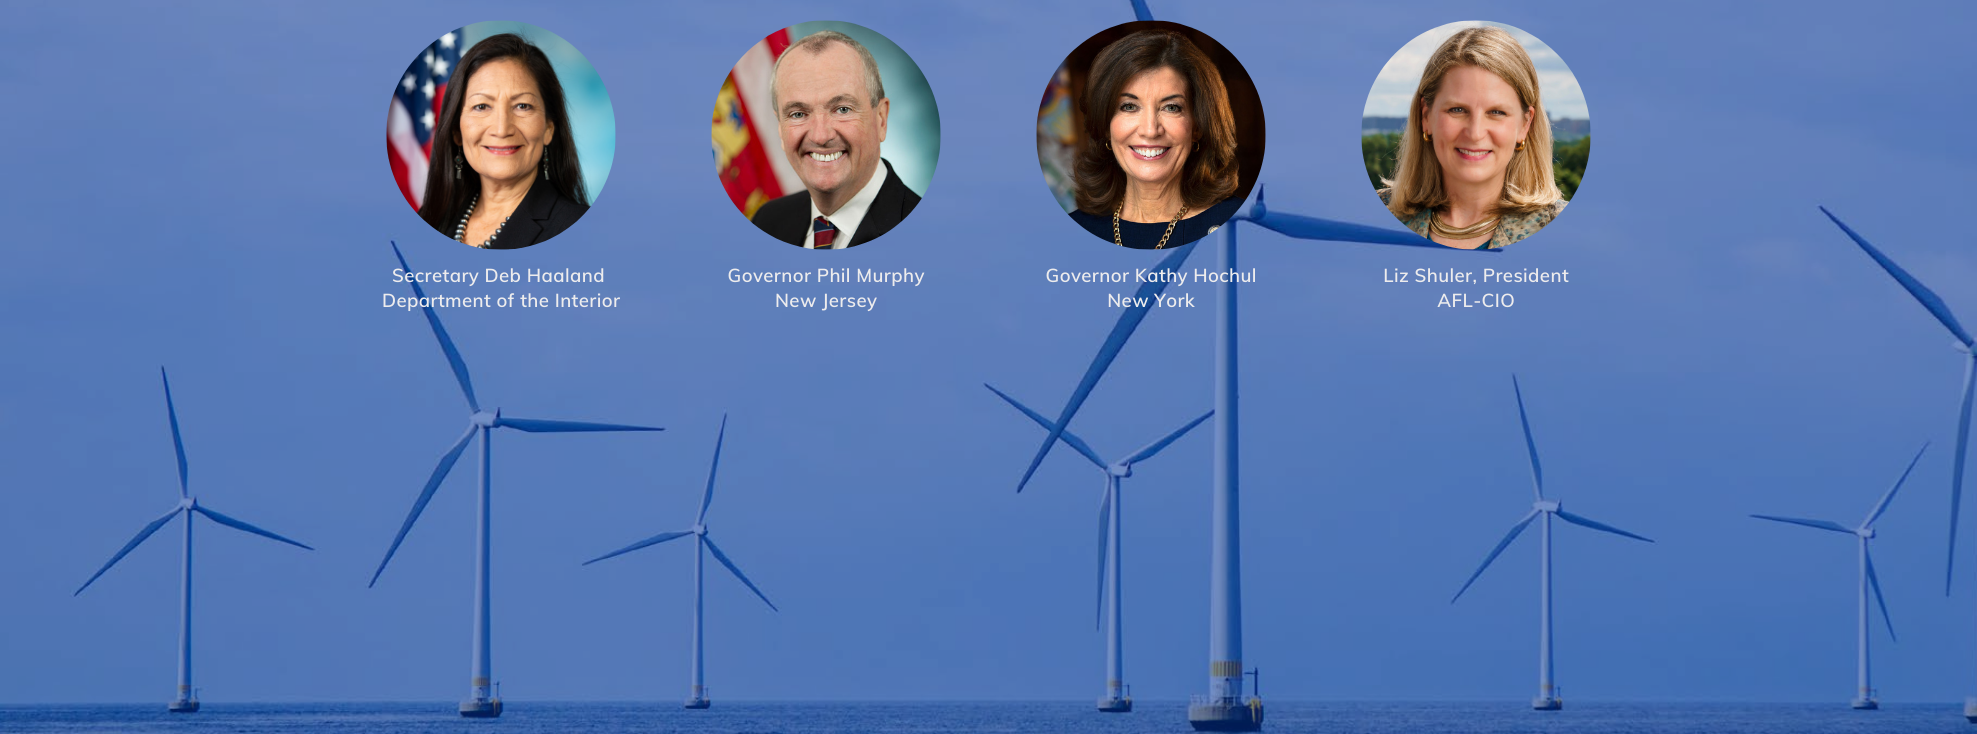 Interior Department, Governor Murphy, Governor Hochul, NYSERDA, and AFL-CIO Announce Historic Wind Energy Auction Offshore New York and New Jersey